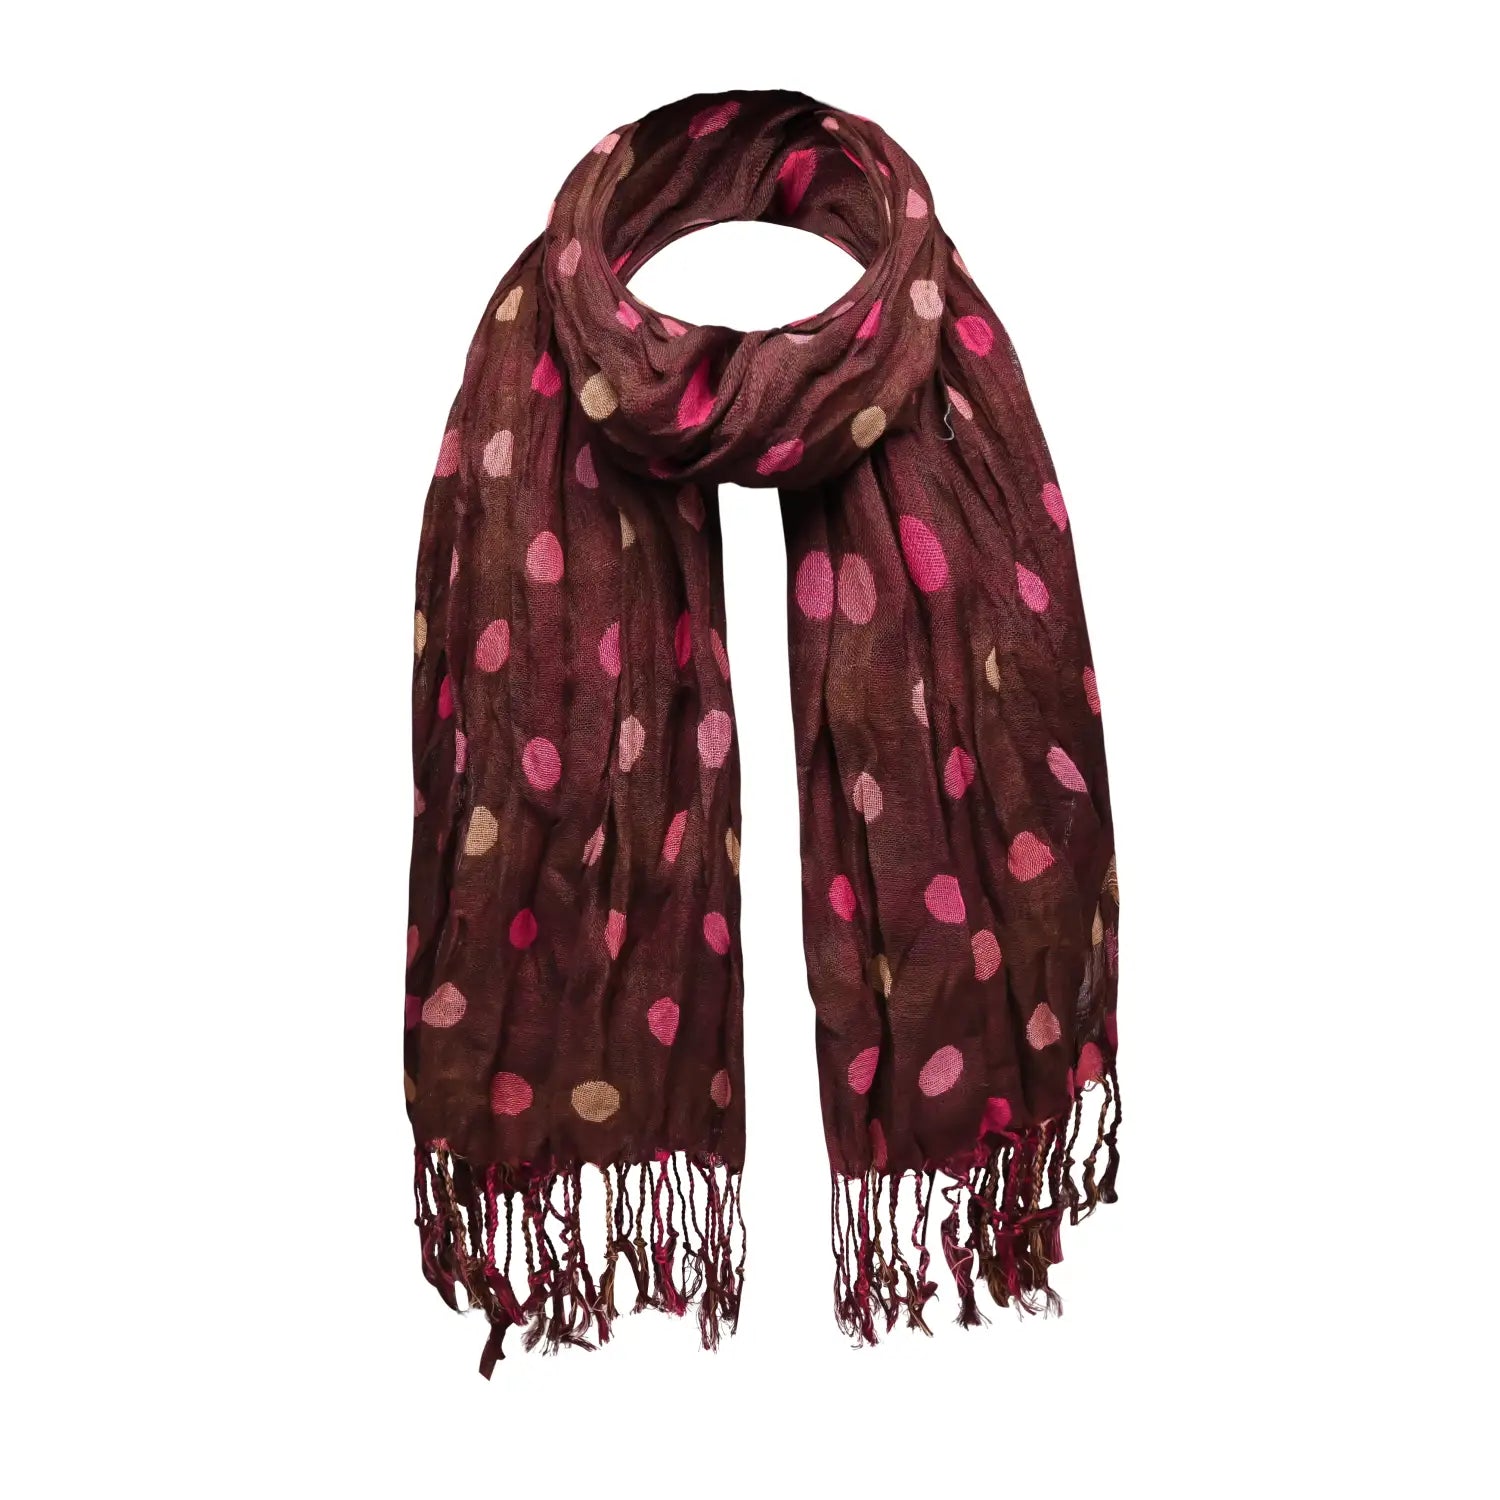 Pink and brown polka dot print long soft scarf with tassels.